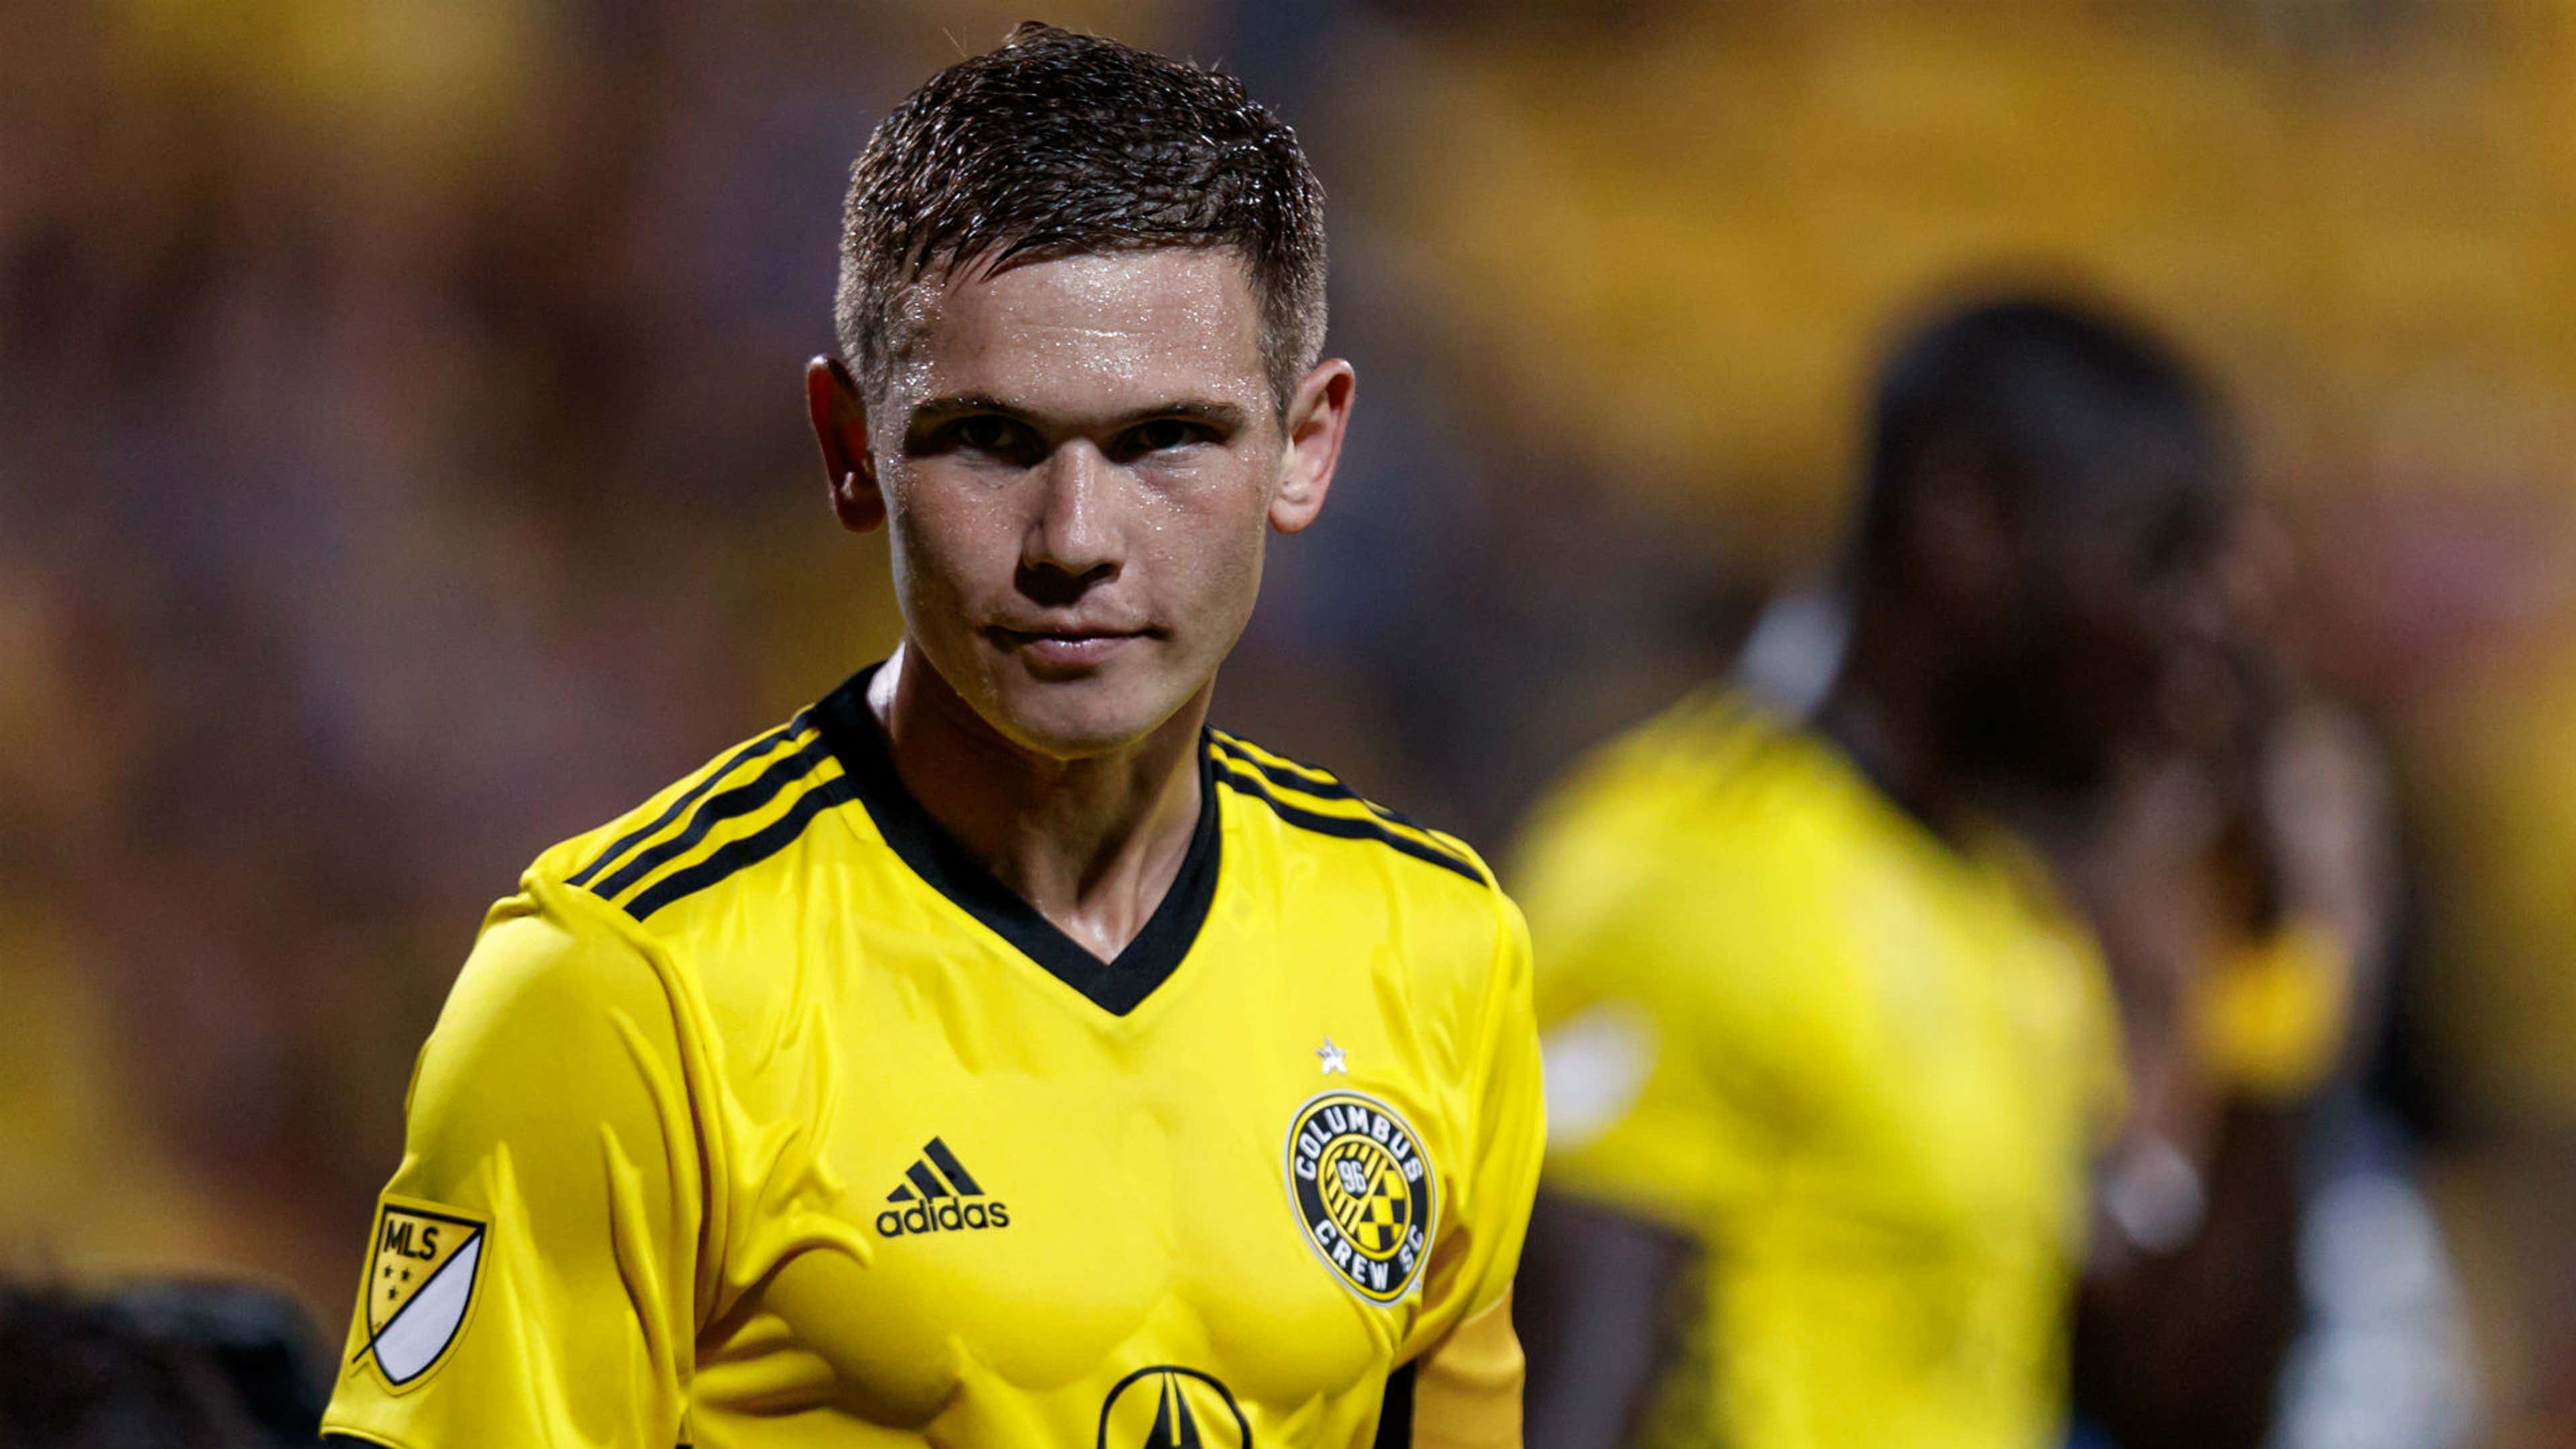 Columbus Crew 2019 season preview: Roster, projected lineup, schedule,  national TV and more